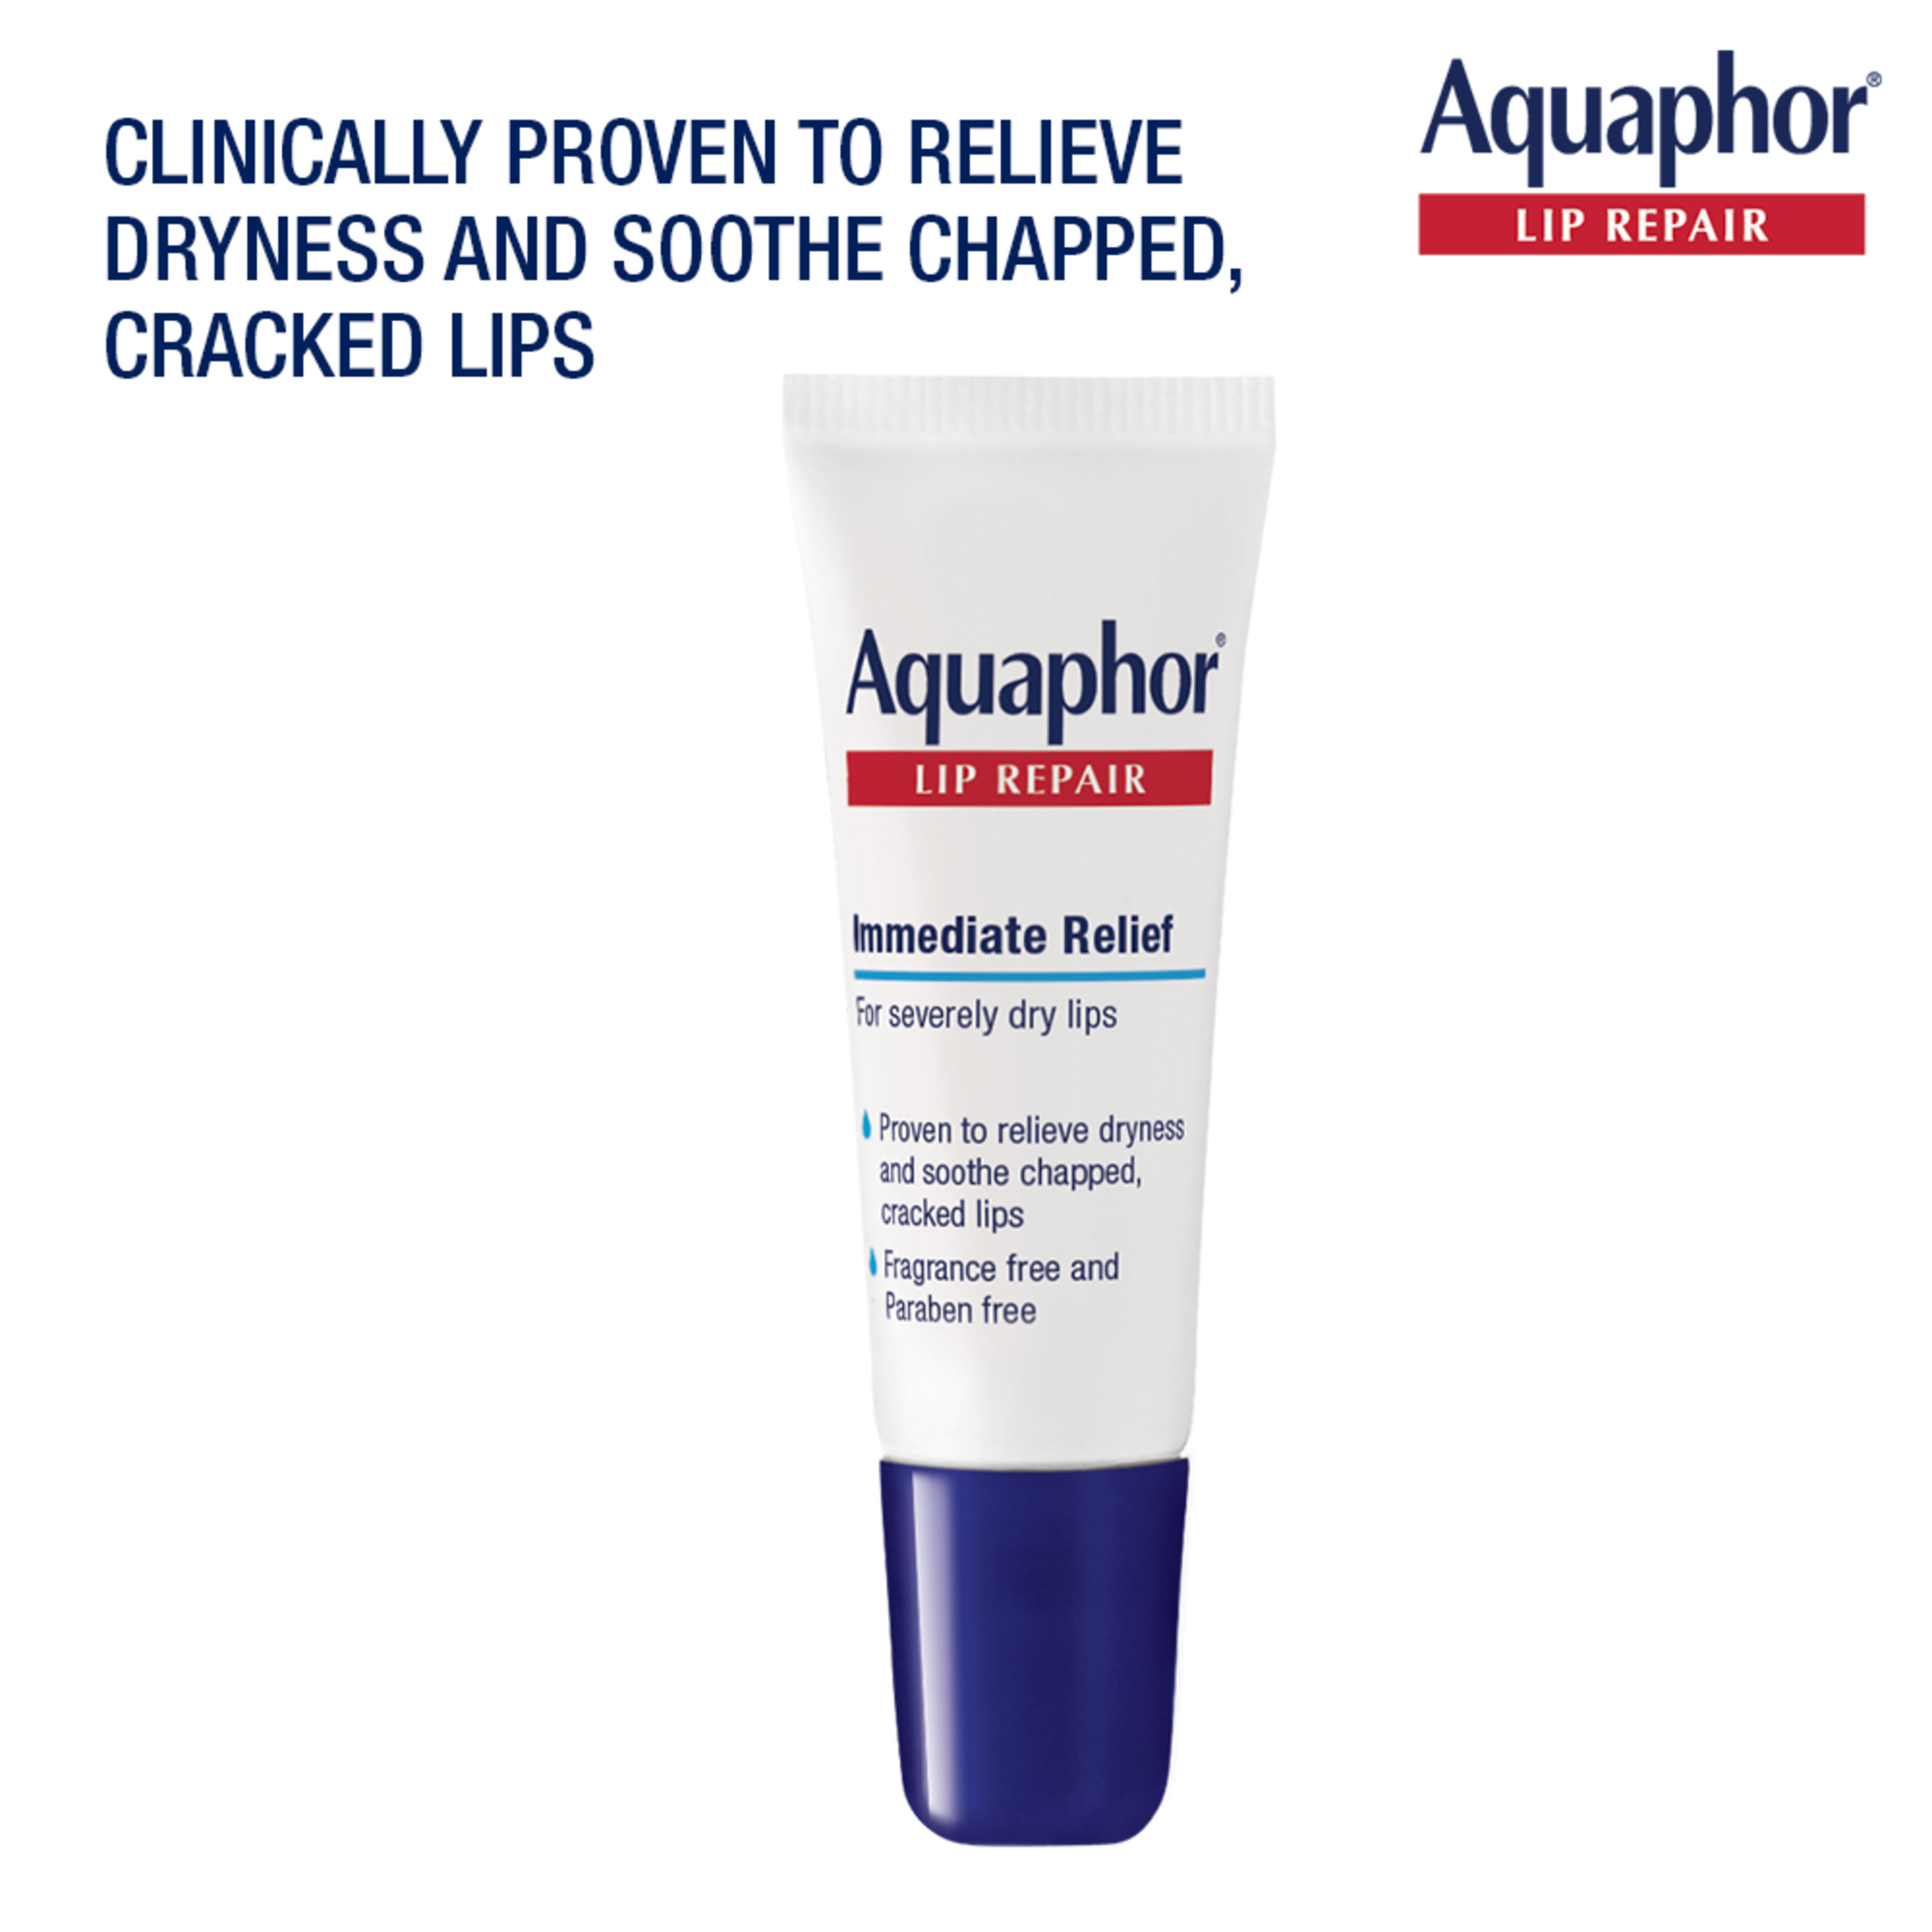 Aquaphor Lip Repair Ointment, Long-lasting Moisture to Soothe Dry Chapped Lips, .35 fl. oz. Tube - image 5 of 9